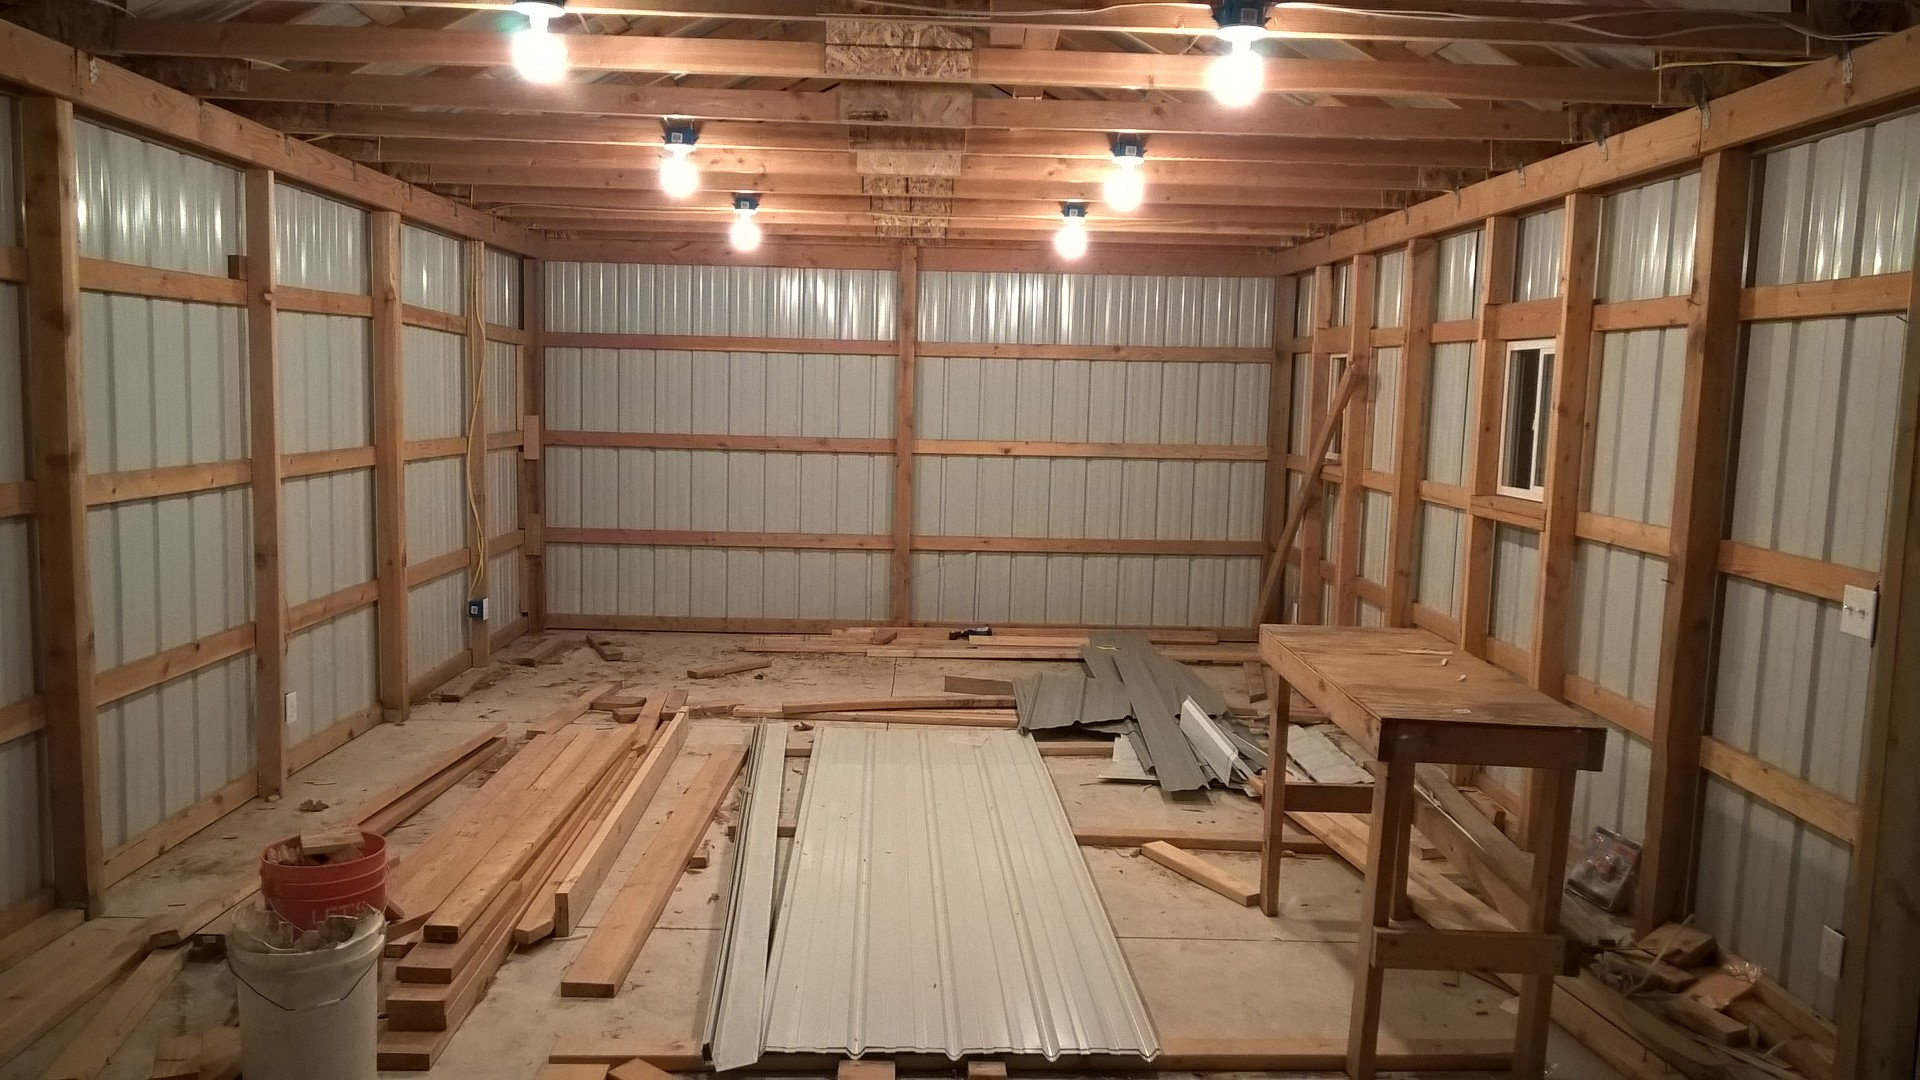 Building A Pole Barn Shed From Scratch P4 – Planning Pole Barn - Pole Barn Wiring Diagram